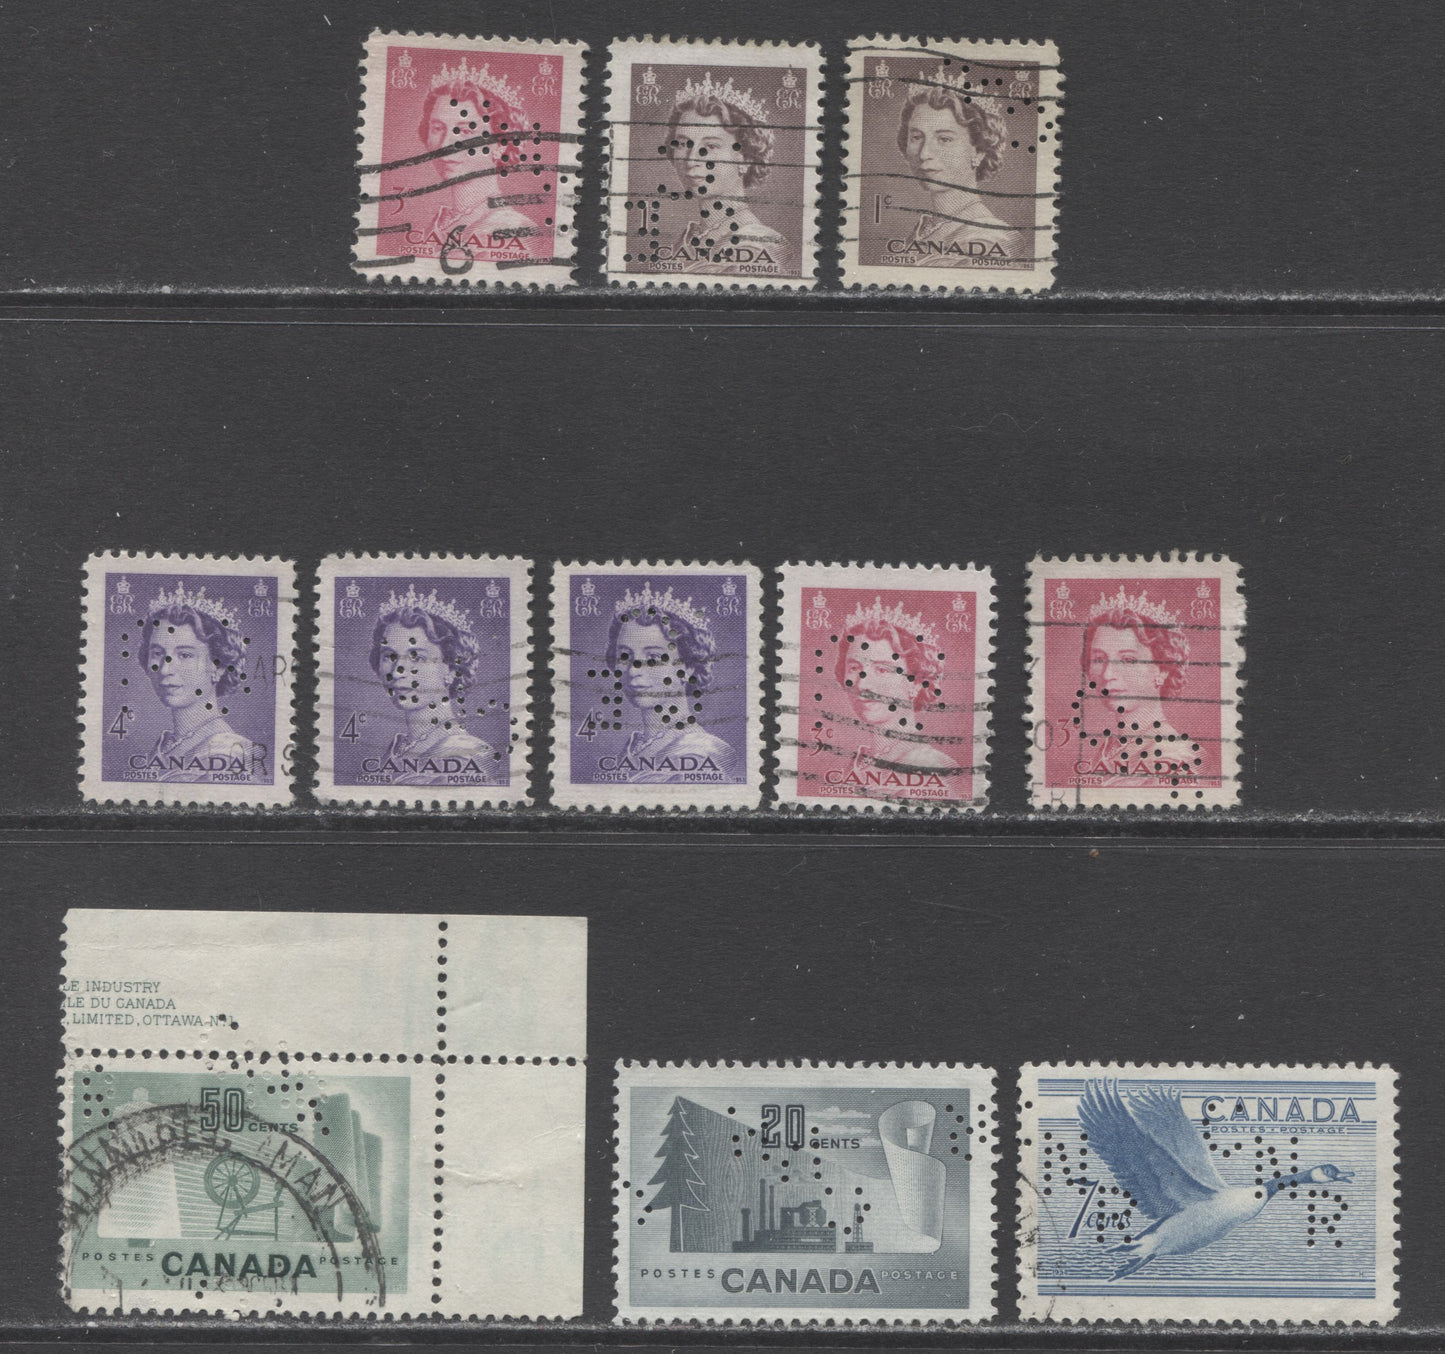 Lot 40 Canada #316-317, 325, 327, 328, 334 1c/50c Violet Brown/Light Green Paper Mill/Queen Elizabeth II /Textiles, 1952-1953 Resource & Karsh Issues, 11 Fine/Very Fine Used Singles Including CPR, CNR, PS & GEC Perfins